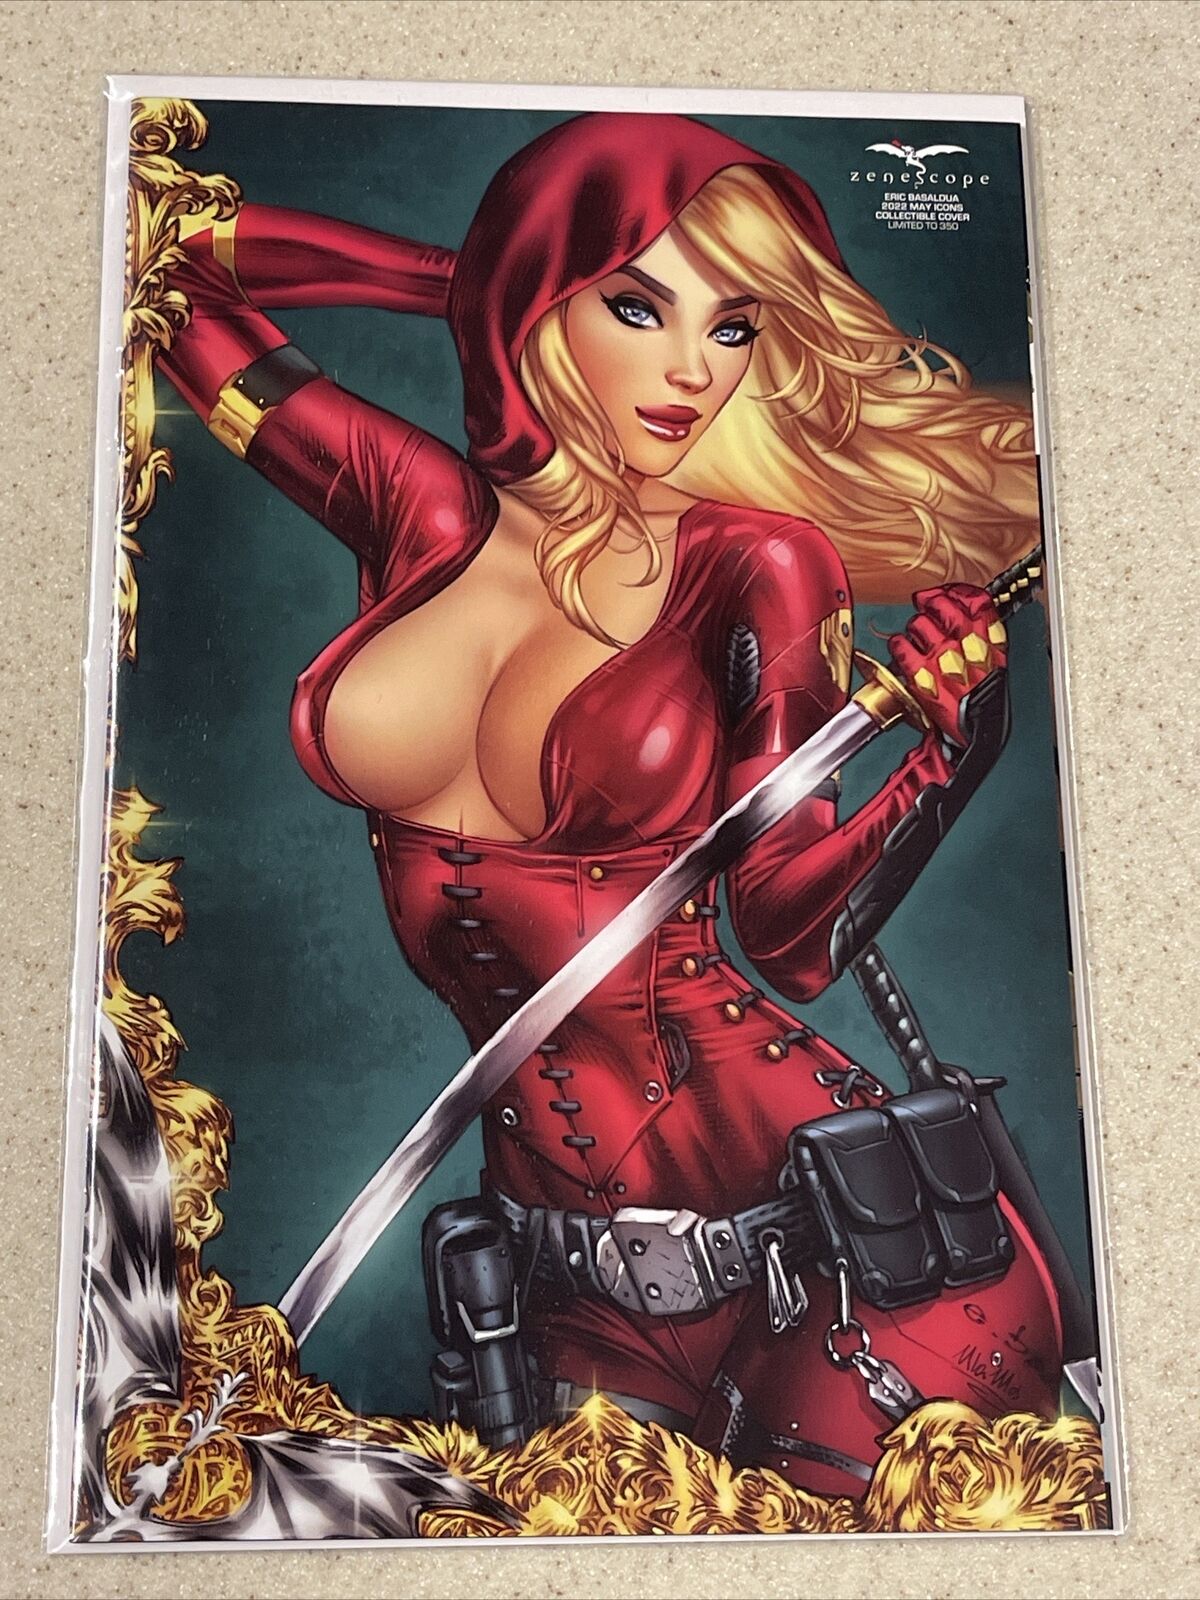 Zenescope Belle: Labyrinth-2022 May Icons Cover Eric Basaldua - LE 350 NM+ comic